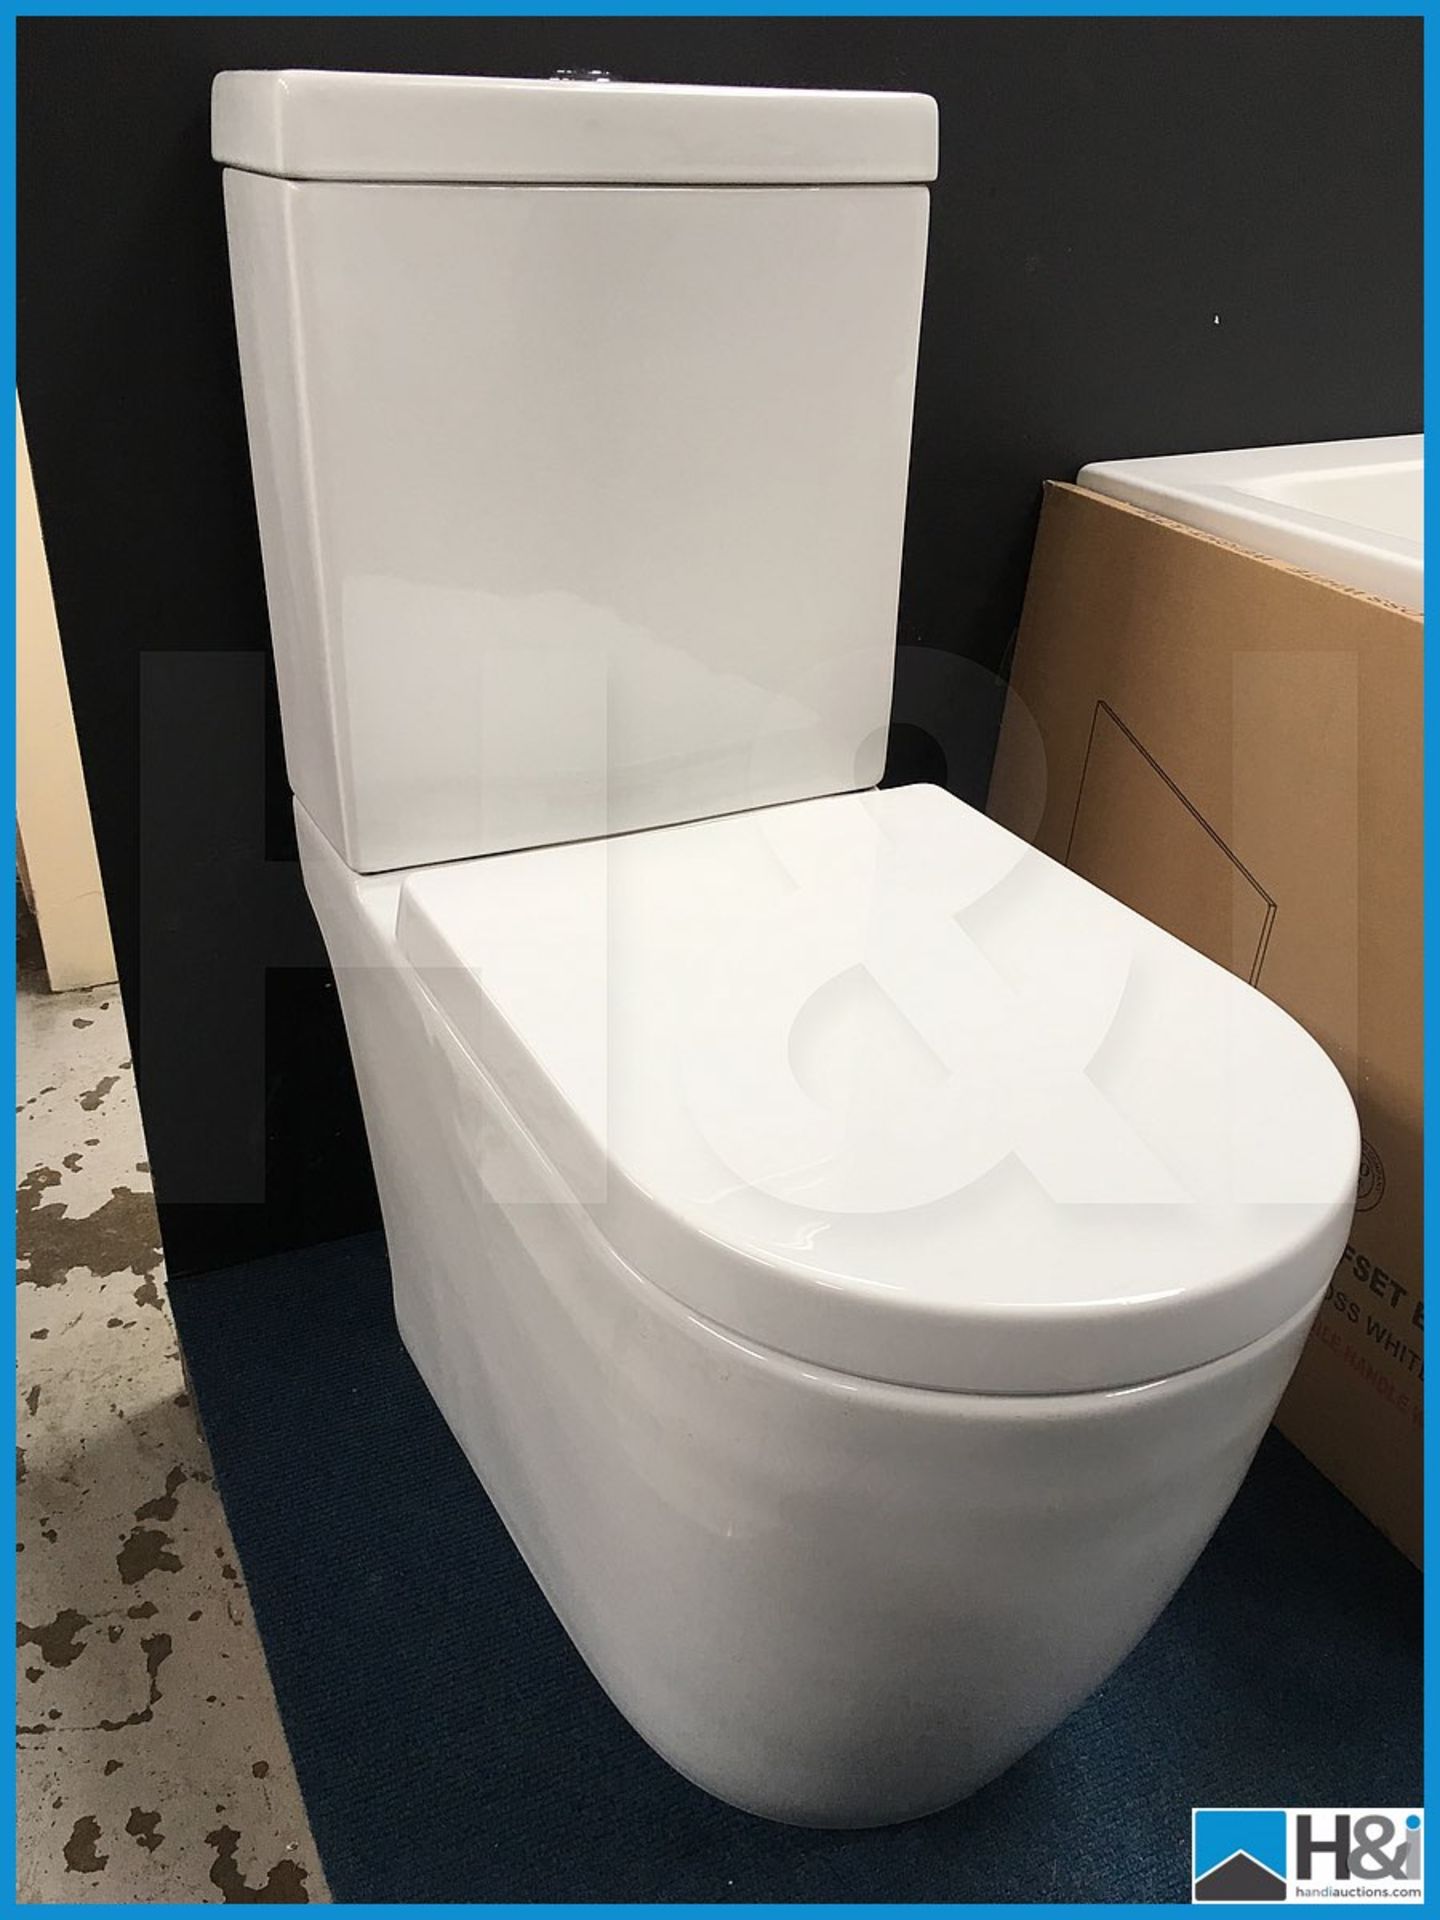 Stunning designer close couple Adam contemporary wc with soft close seat. New and boxed. Suggested